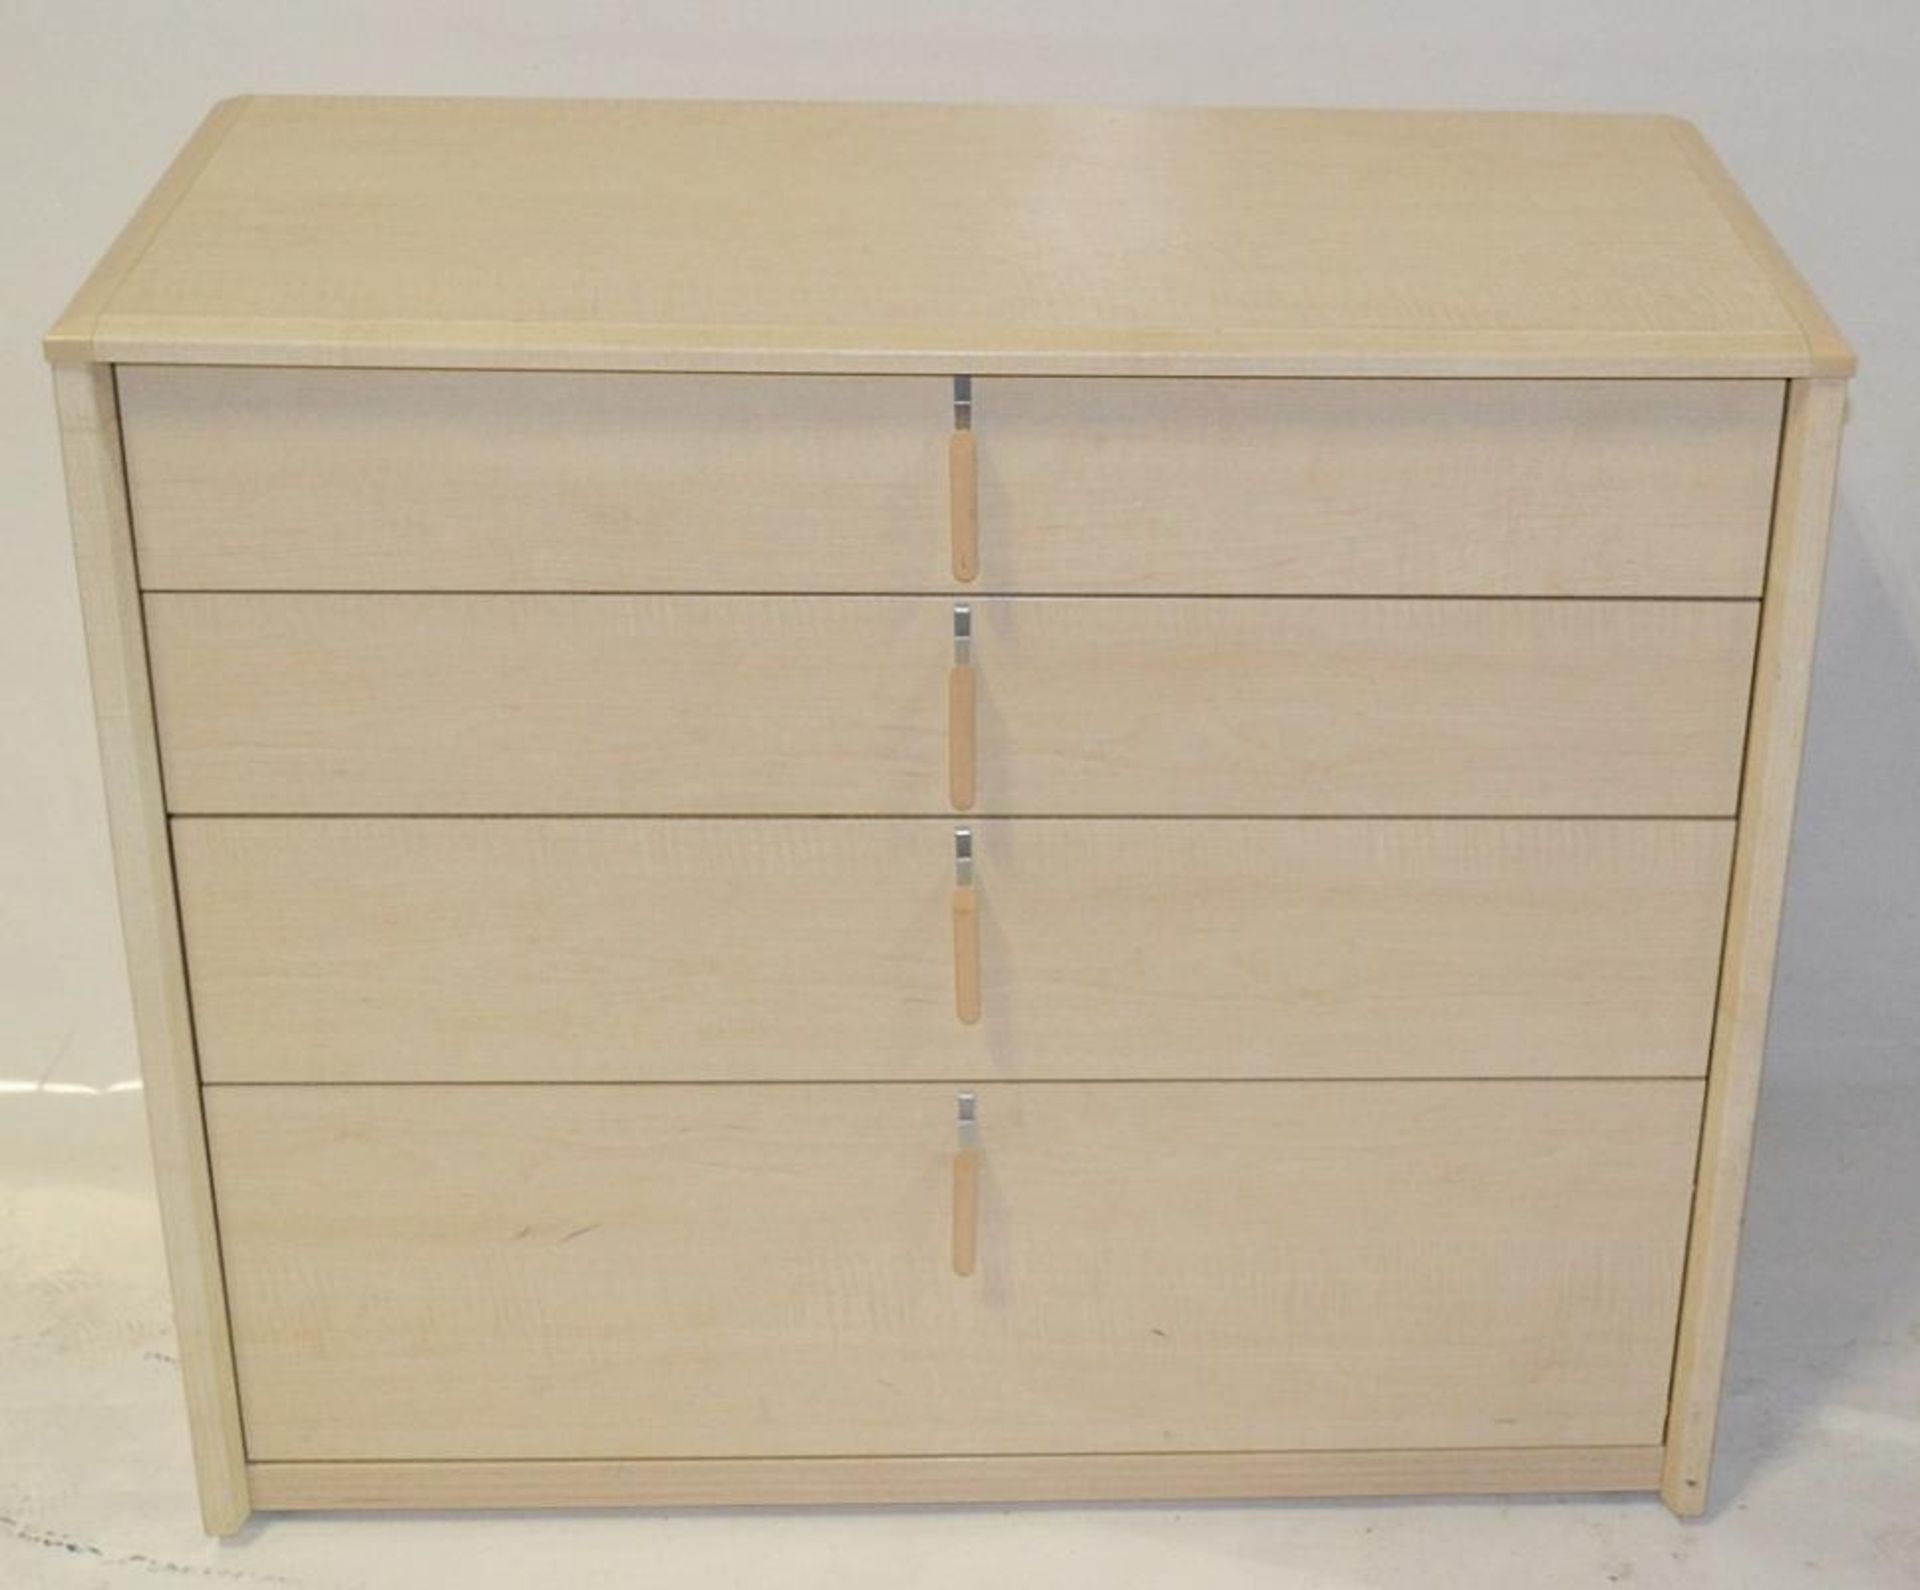 1 x GAUTIER Chest Of Drawers With A Natural Oak Finish - Dimensions: W94 x D45 x H79.5cm - CL268 - R